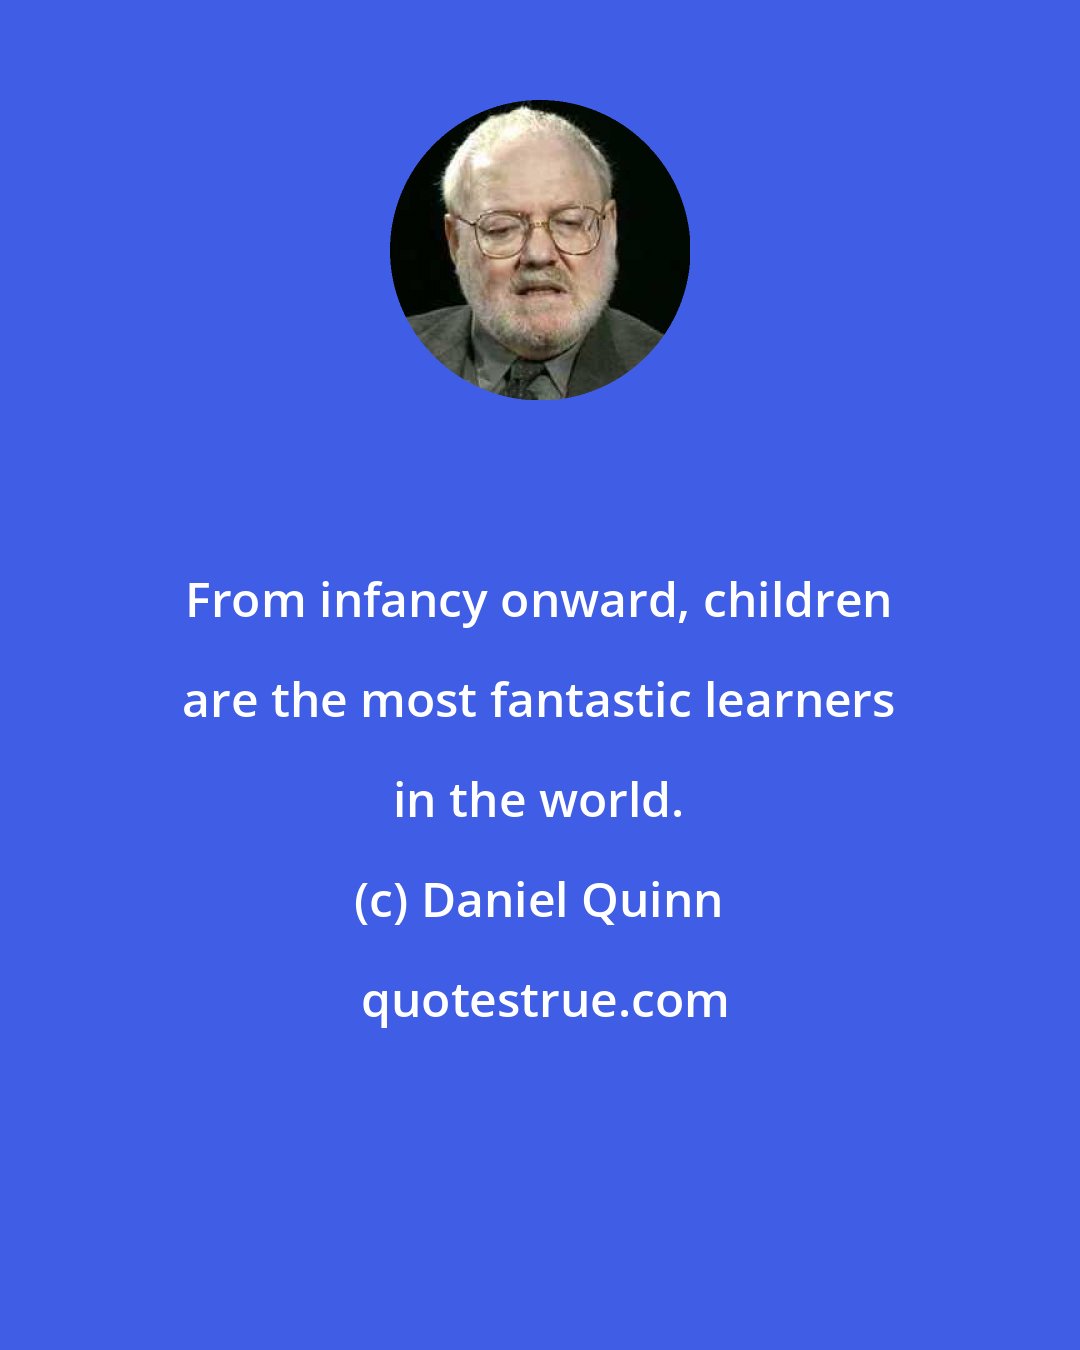 Daniel Quinn: From infancy onward, children are the most fantastic learners in the world.